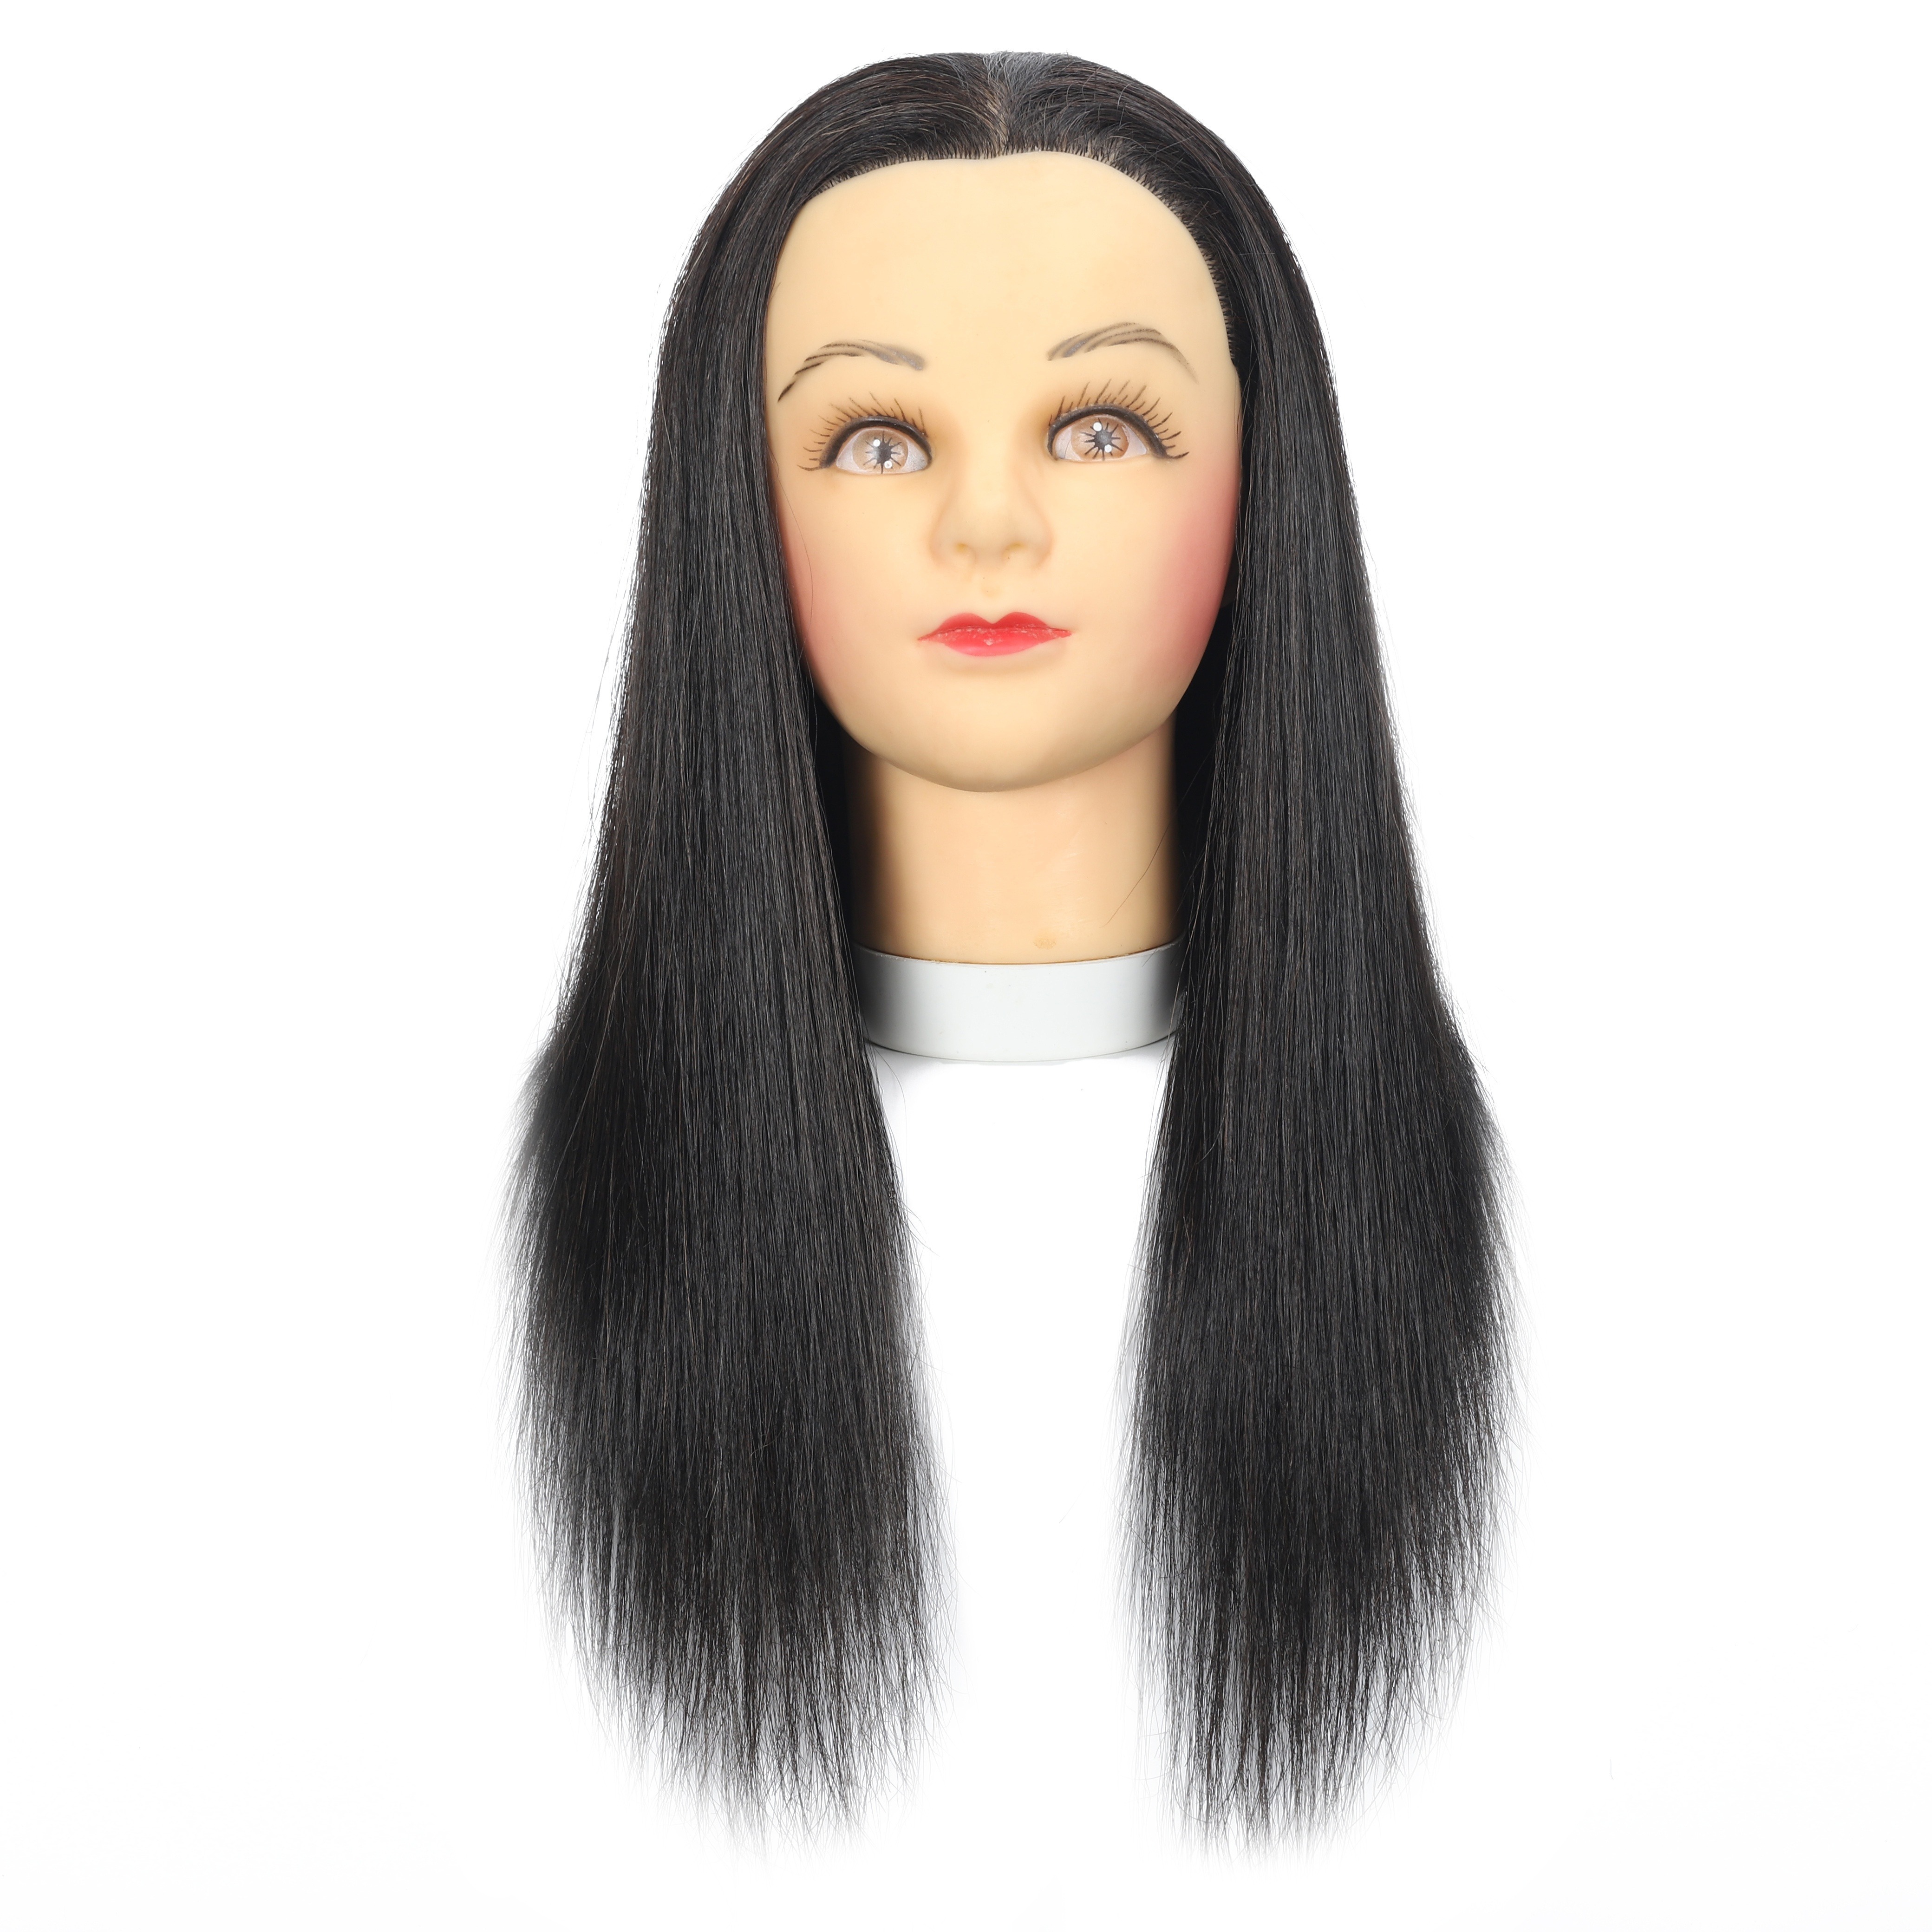 Mannequin Head With 85%Real Hair Hairdresser Practice Training